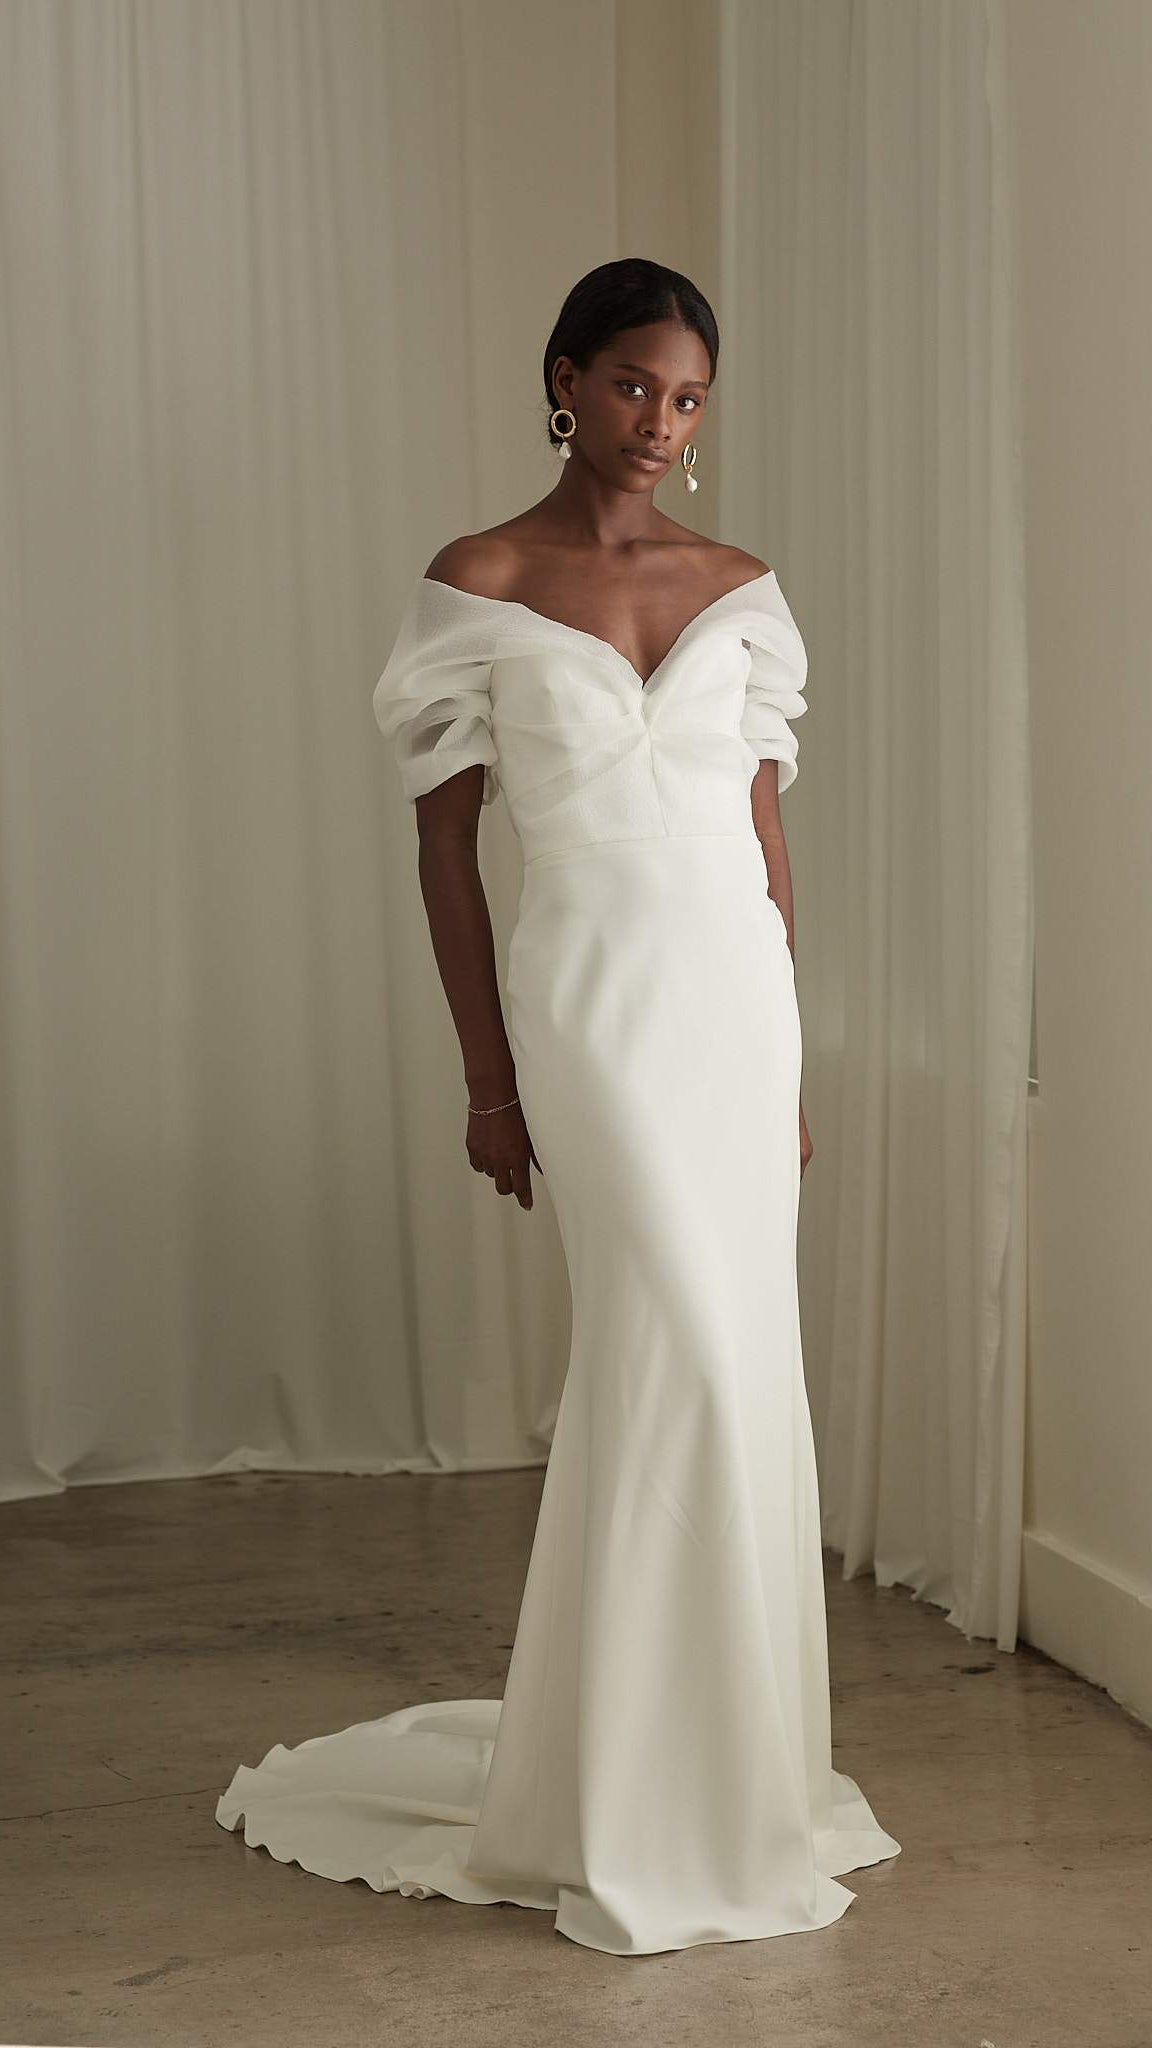 White One | Find the one - Wedding dresses with a youthful twist